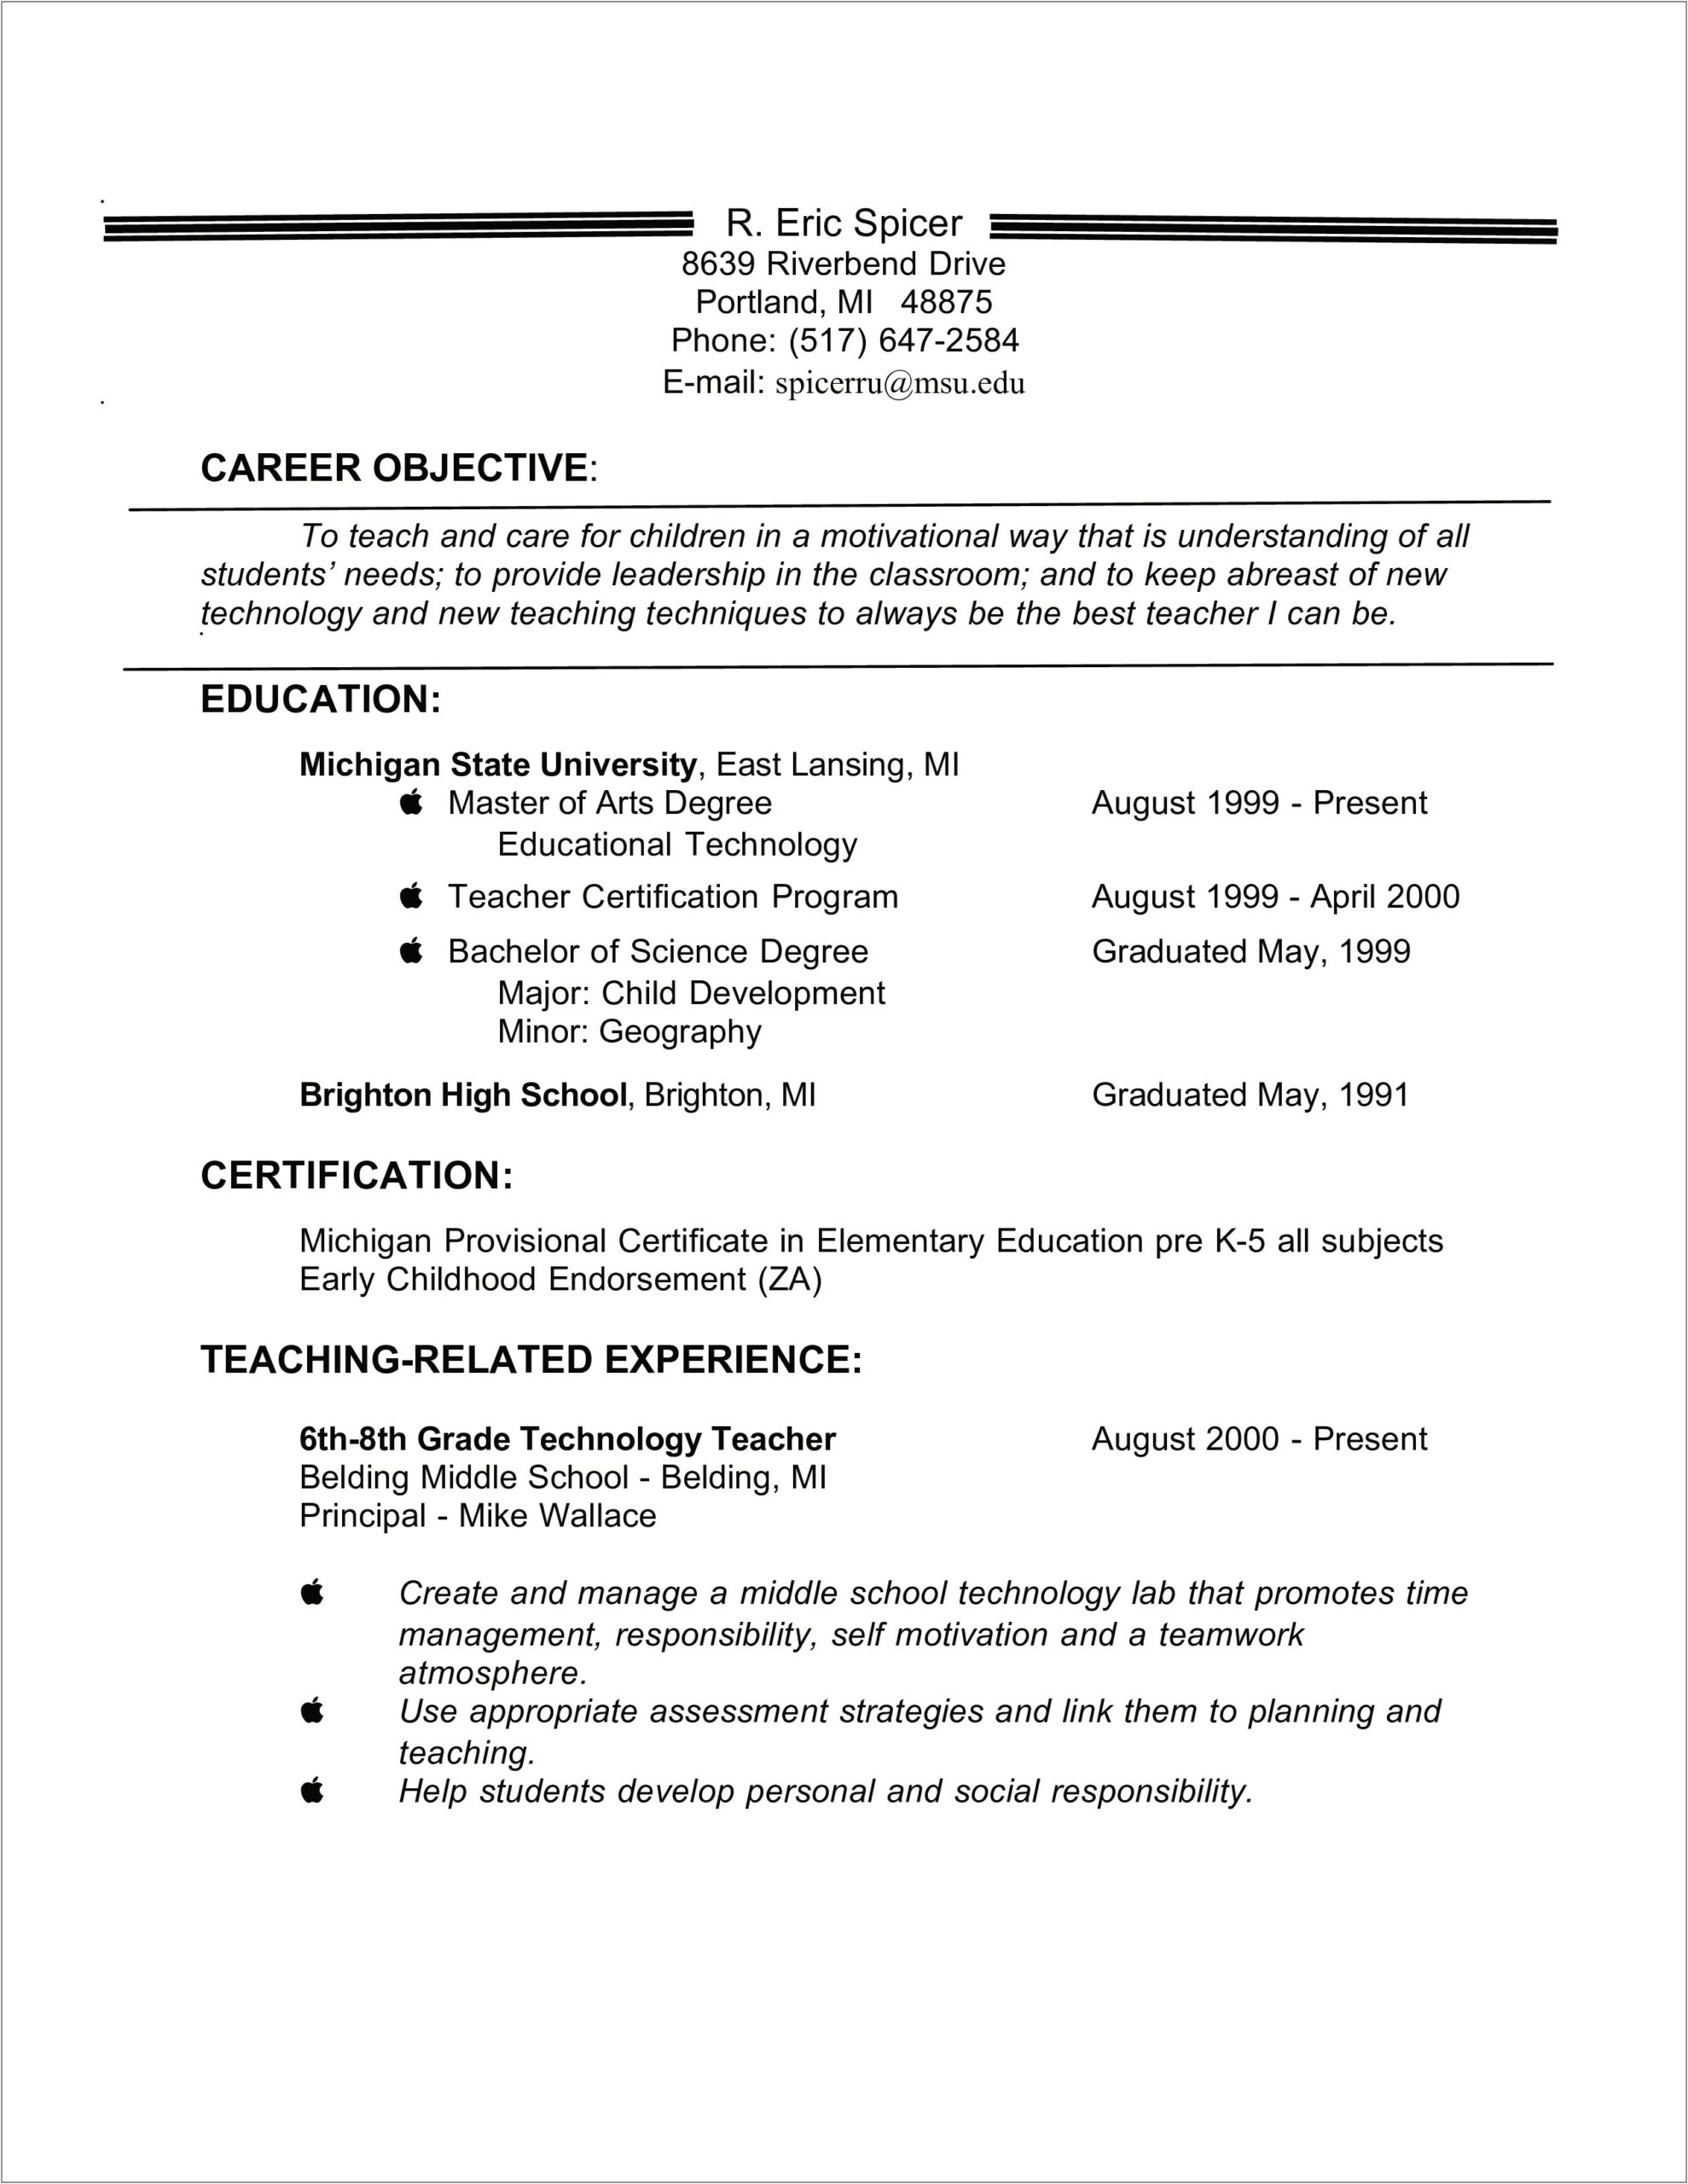 Examples Of Objectives For A Teaching Resume